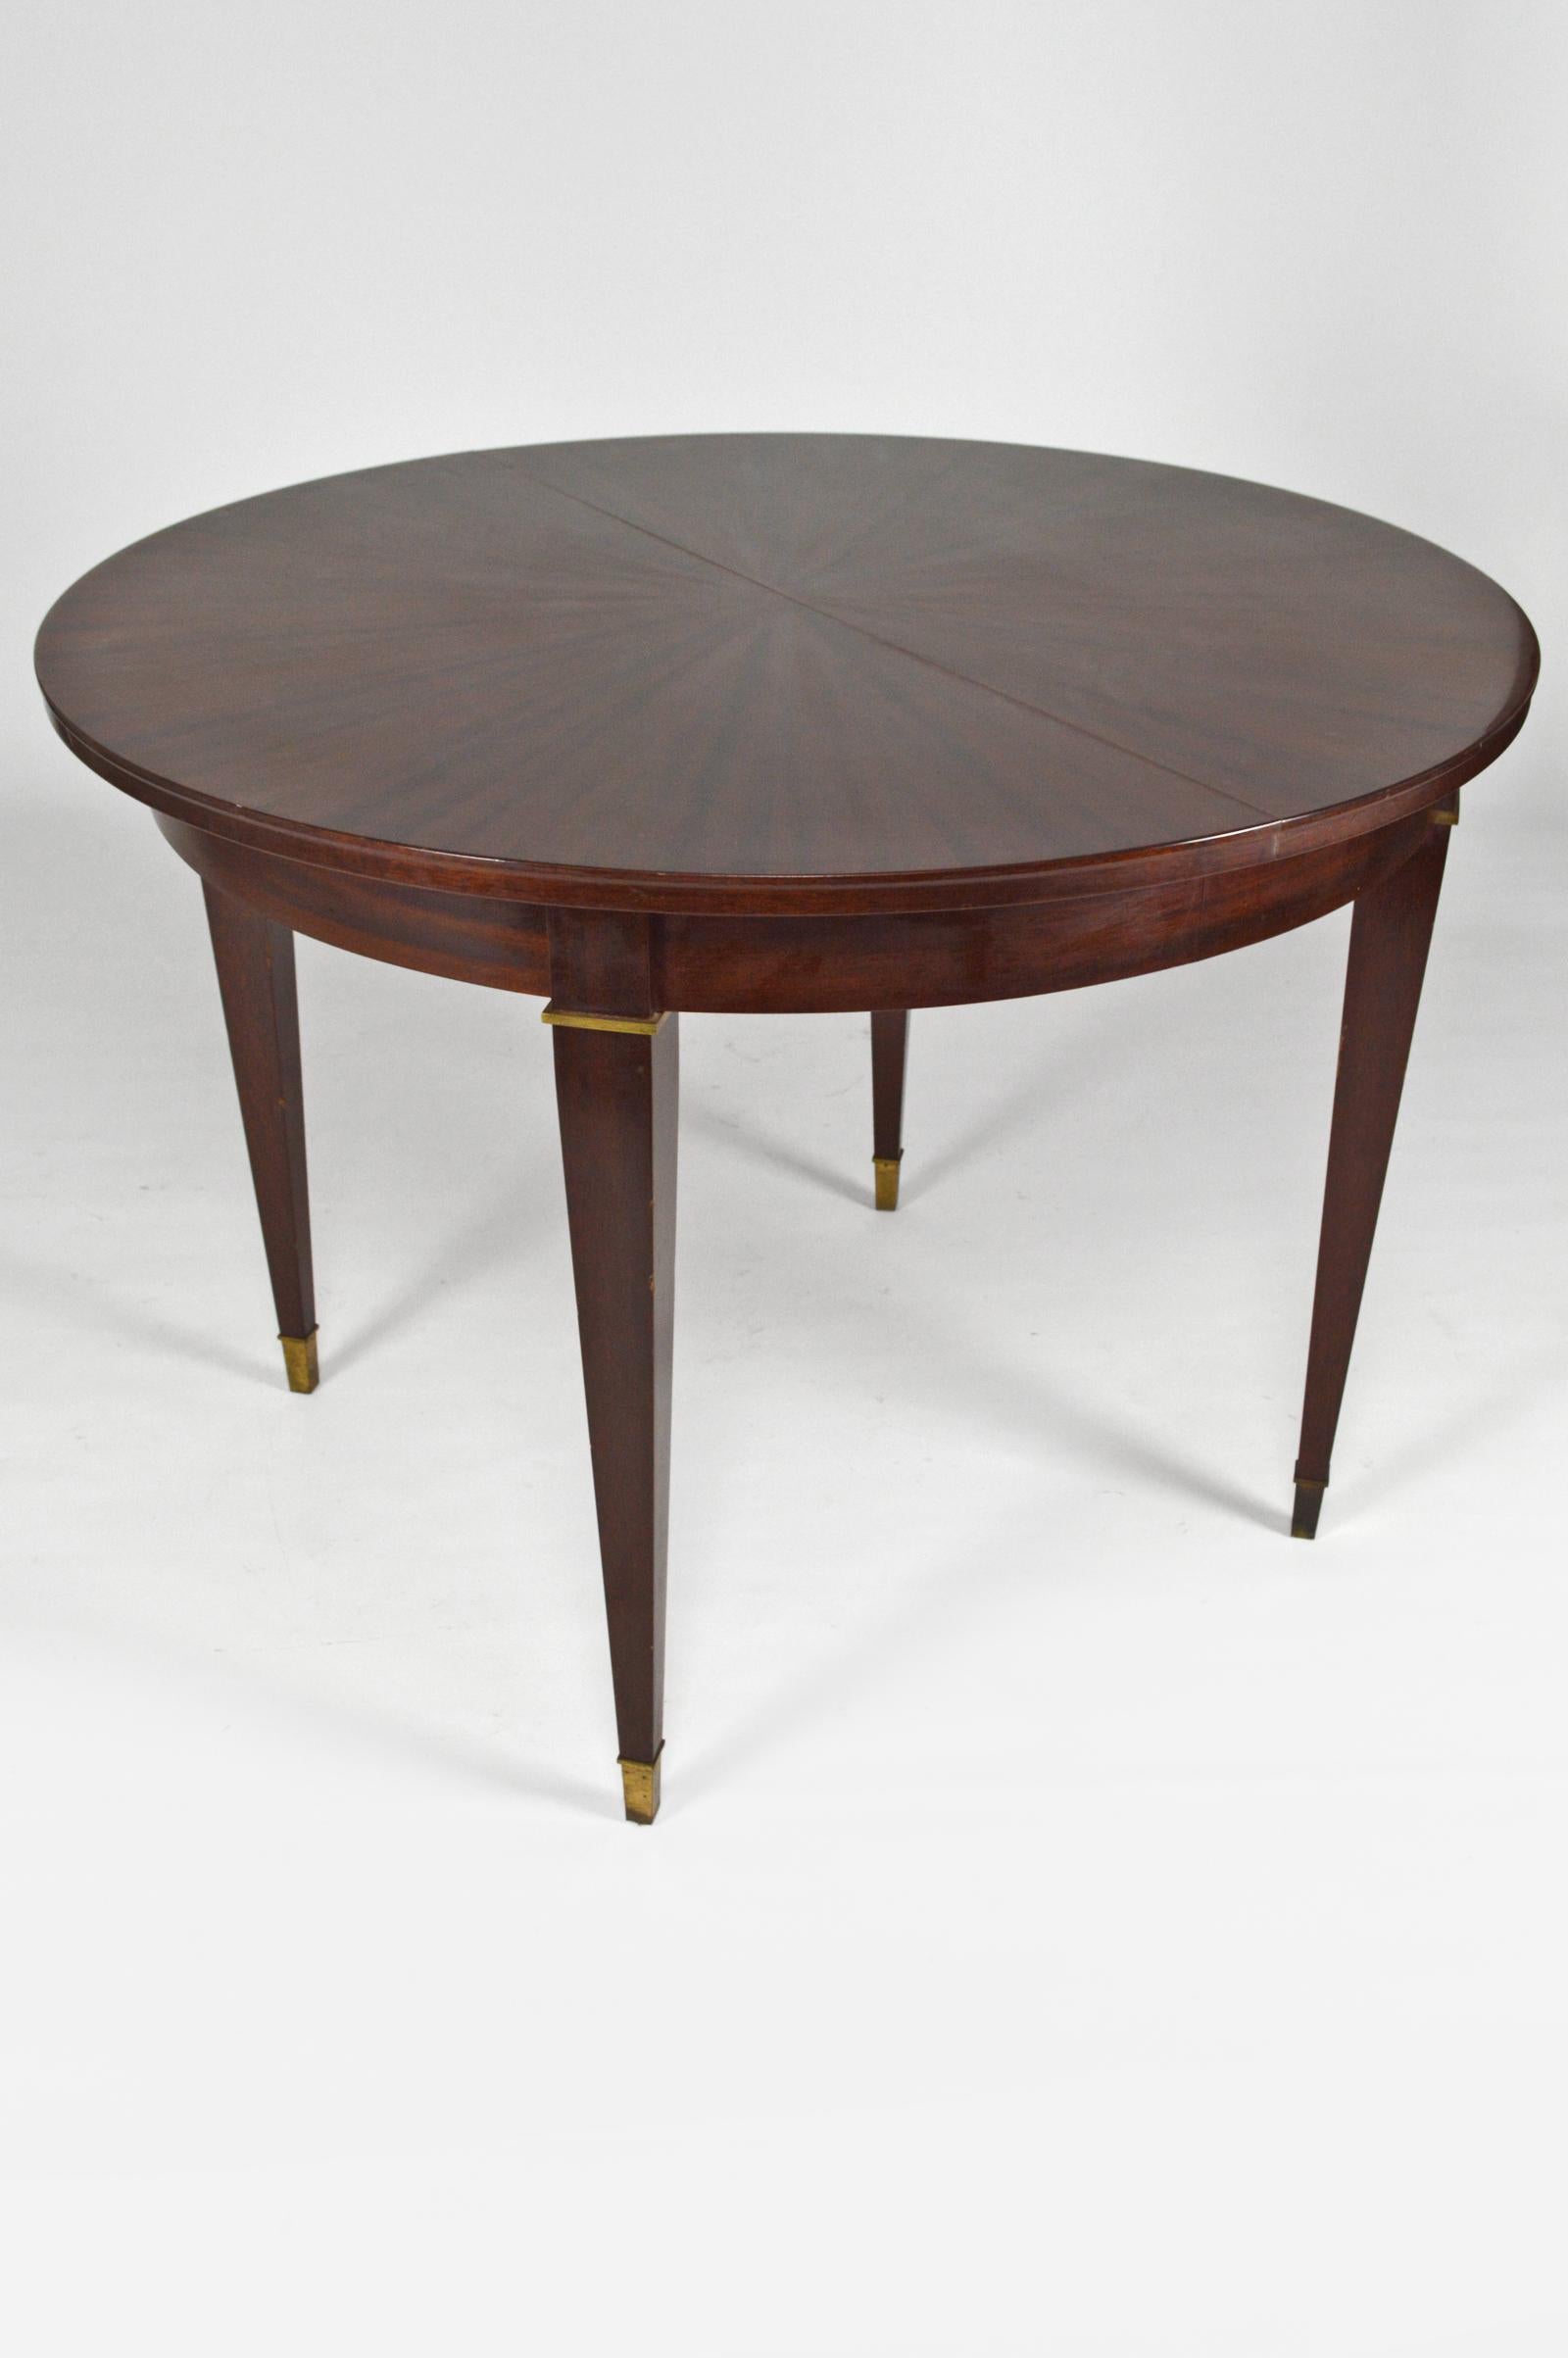 Art Deco Mahogany Round Table with Extensions, by Jacques Adnet, circa 1940 For Sale 2